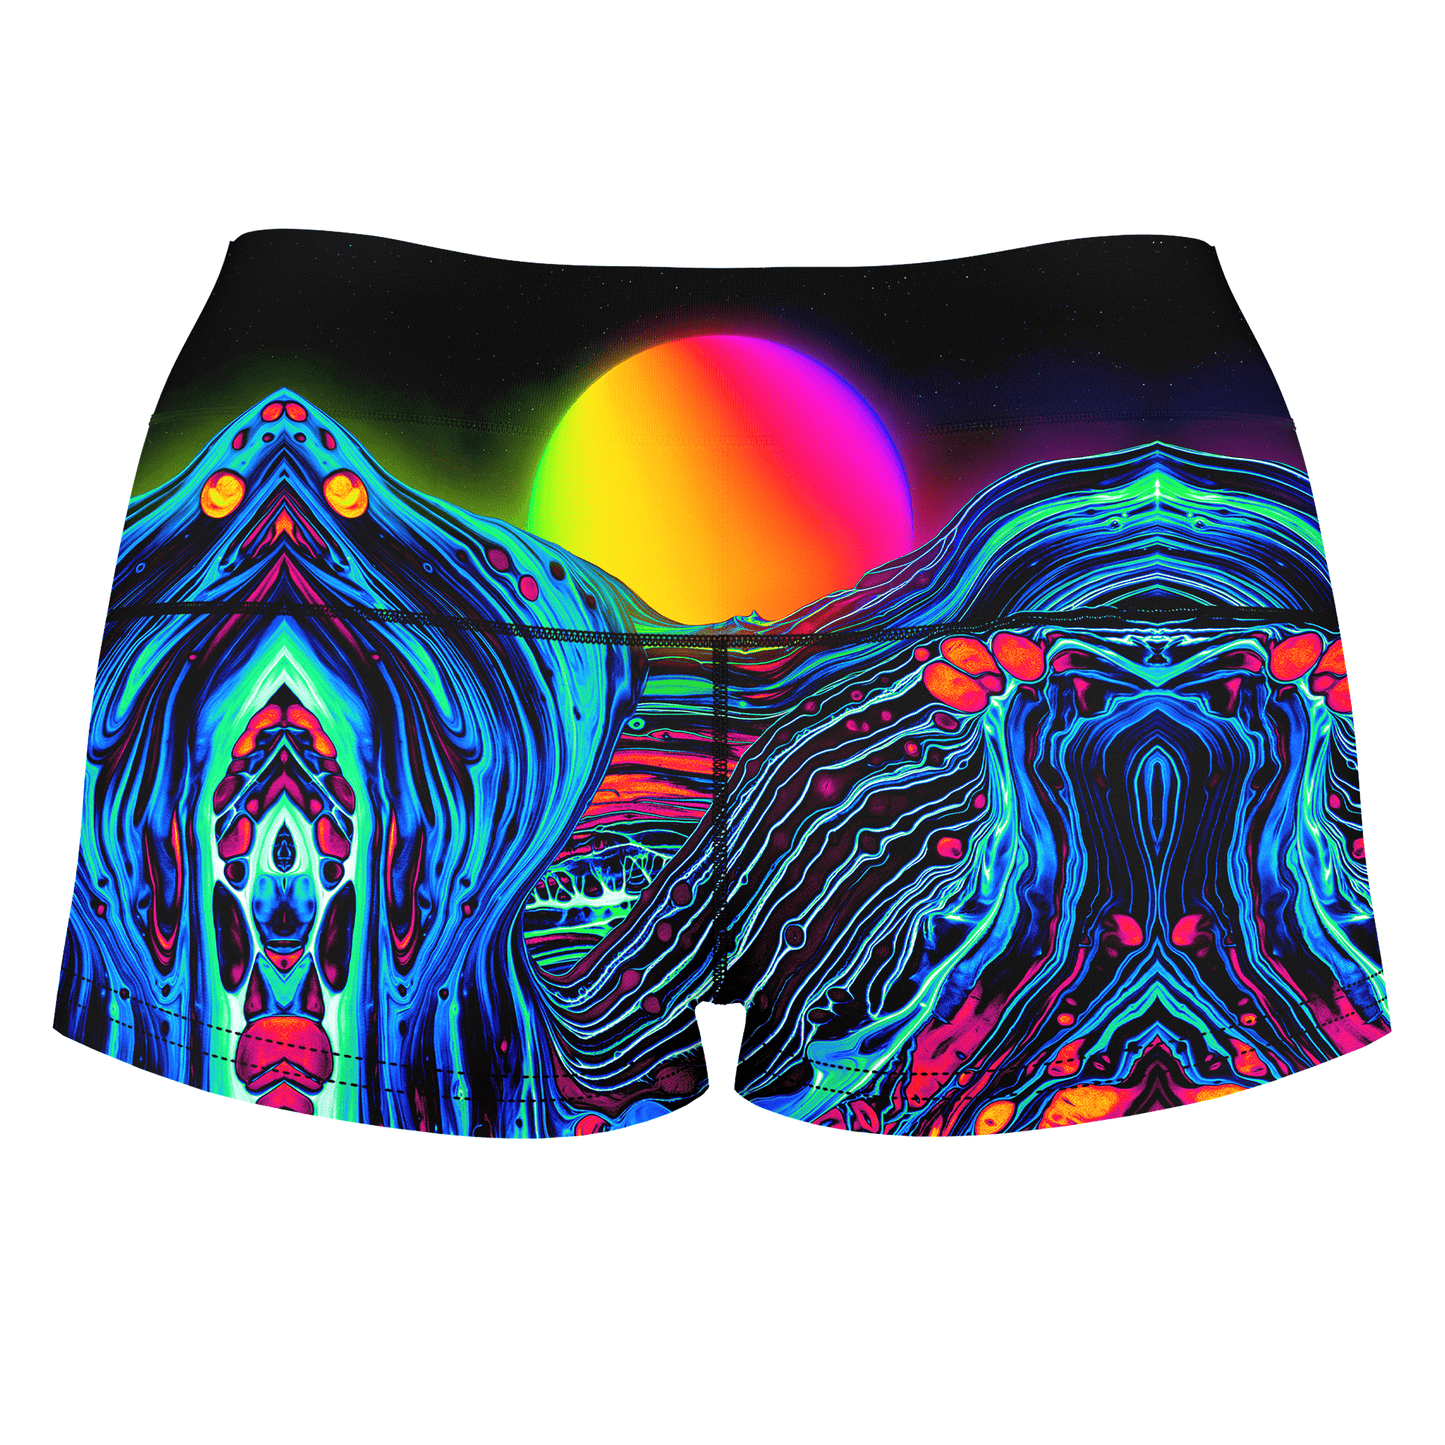 Dose of Sunset High-Waisted Women's Shorts, Noctum X Truth, | iEDM